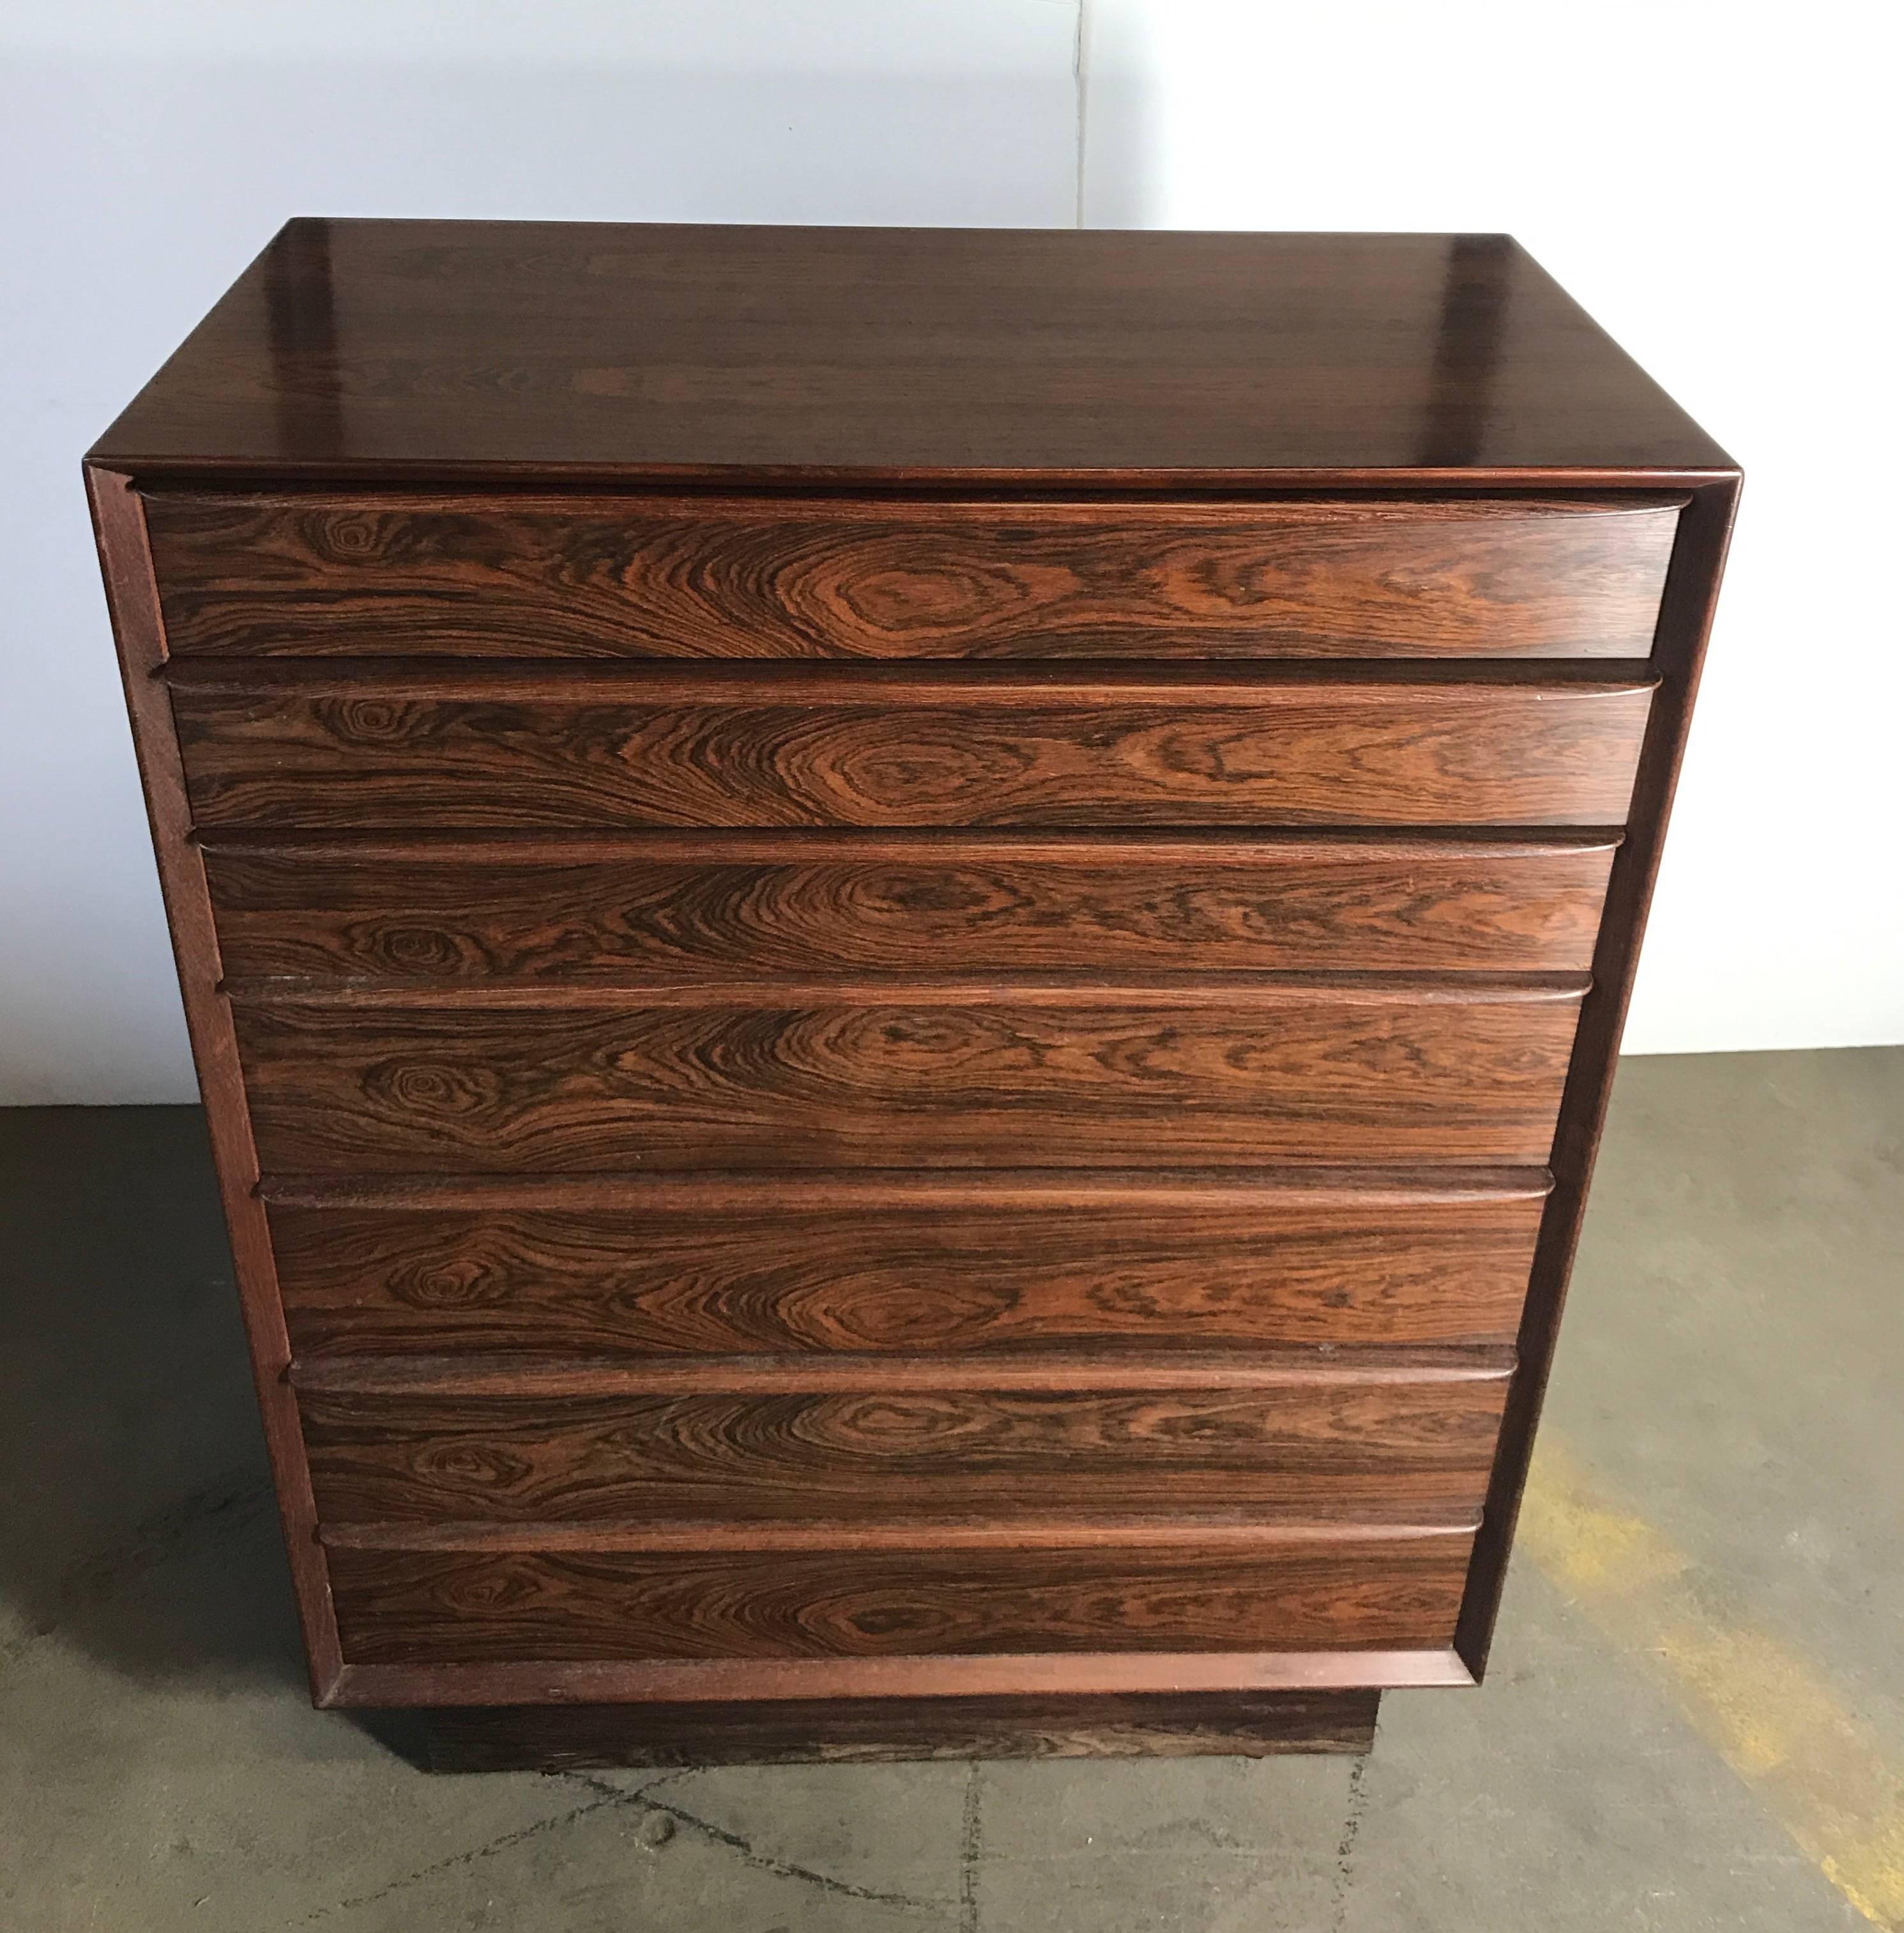 Stunning rosewood Falster seven-drawer chest made in Denmark, beautiful bookmatched grain. Superior quality and construction. Dove tail joinery, solid birch interior to drawers., rosewood finished back.